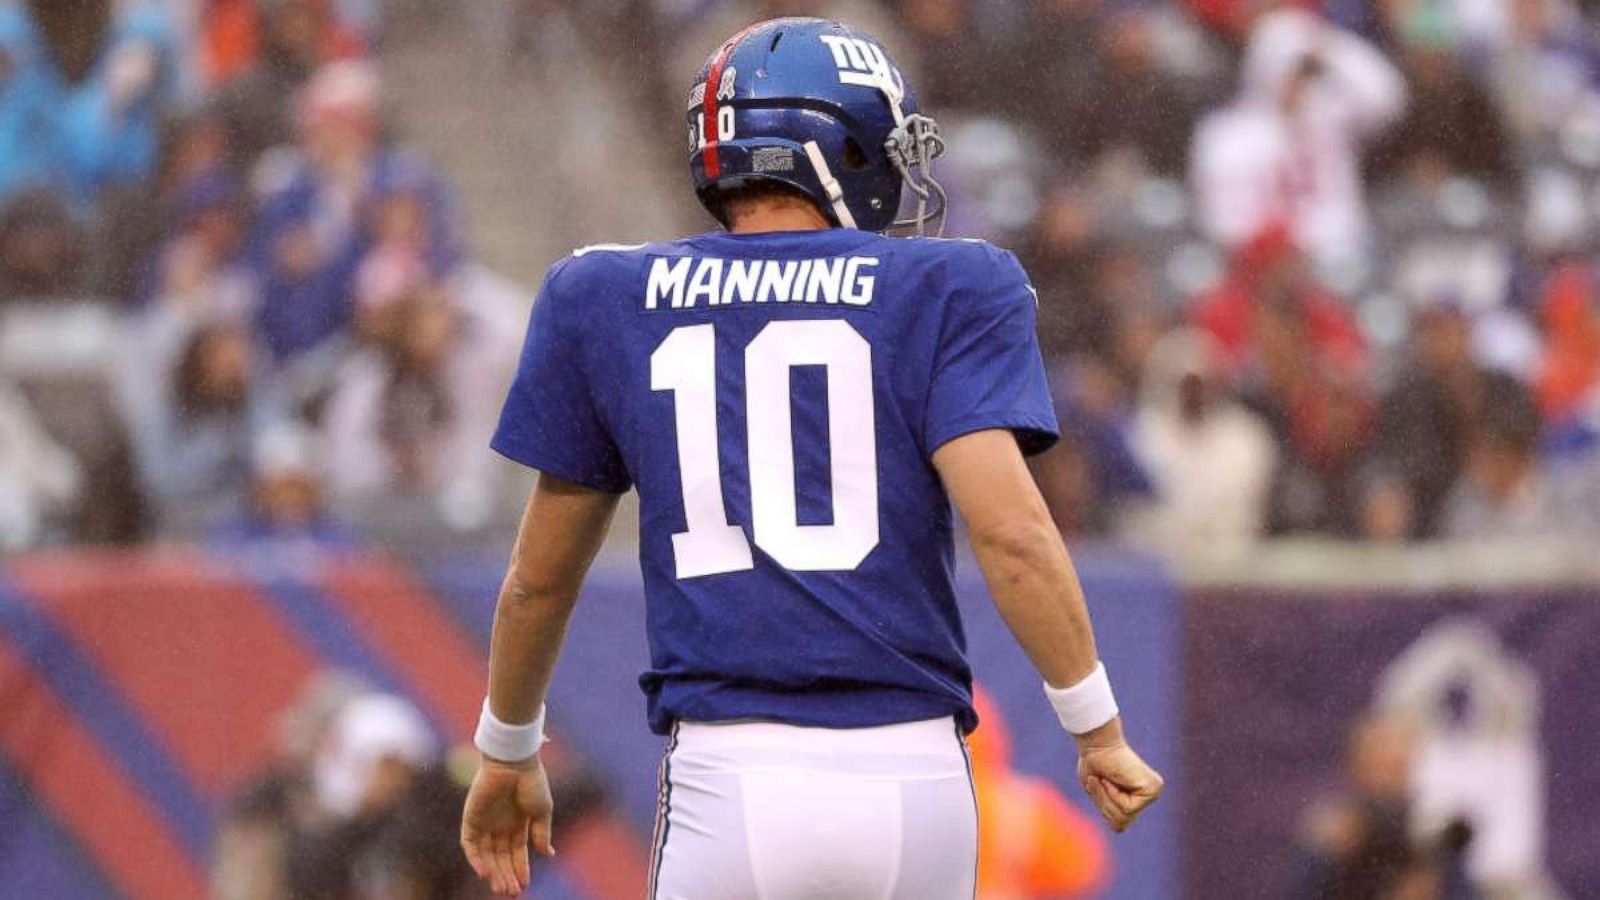 giants manning jersey